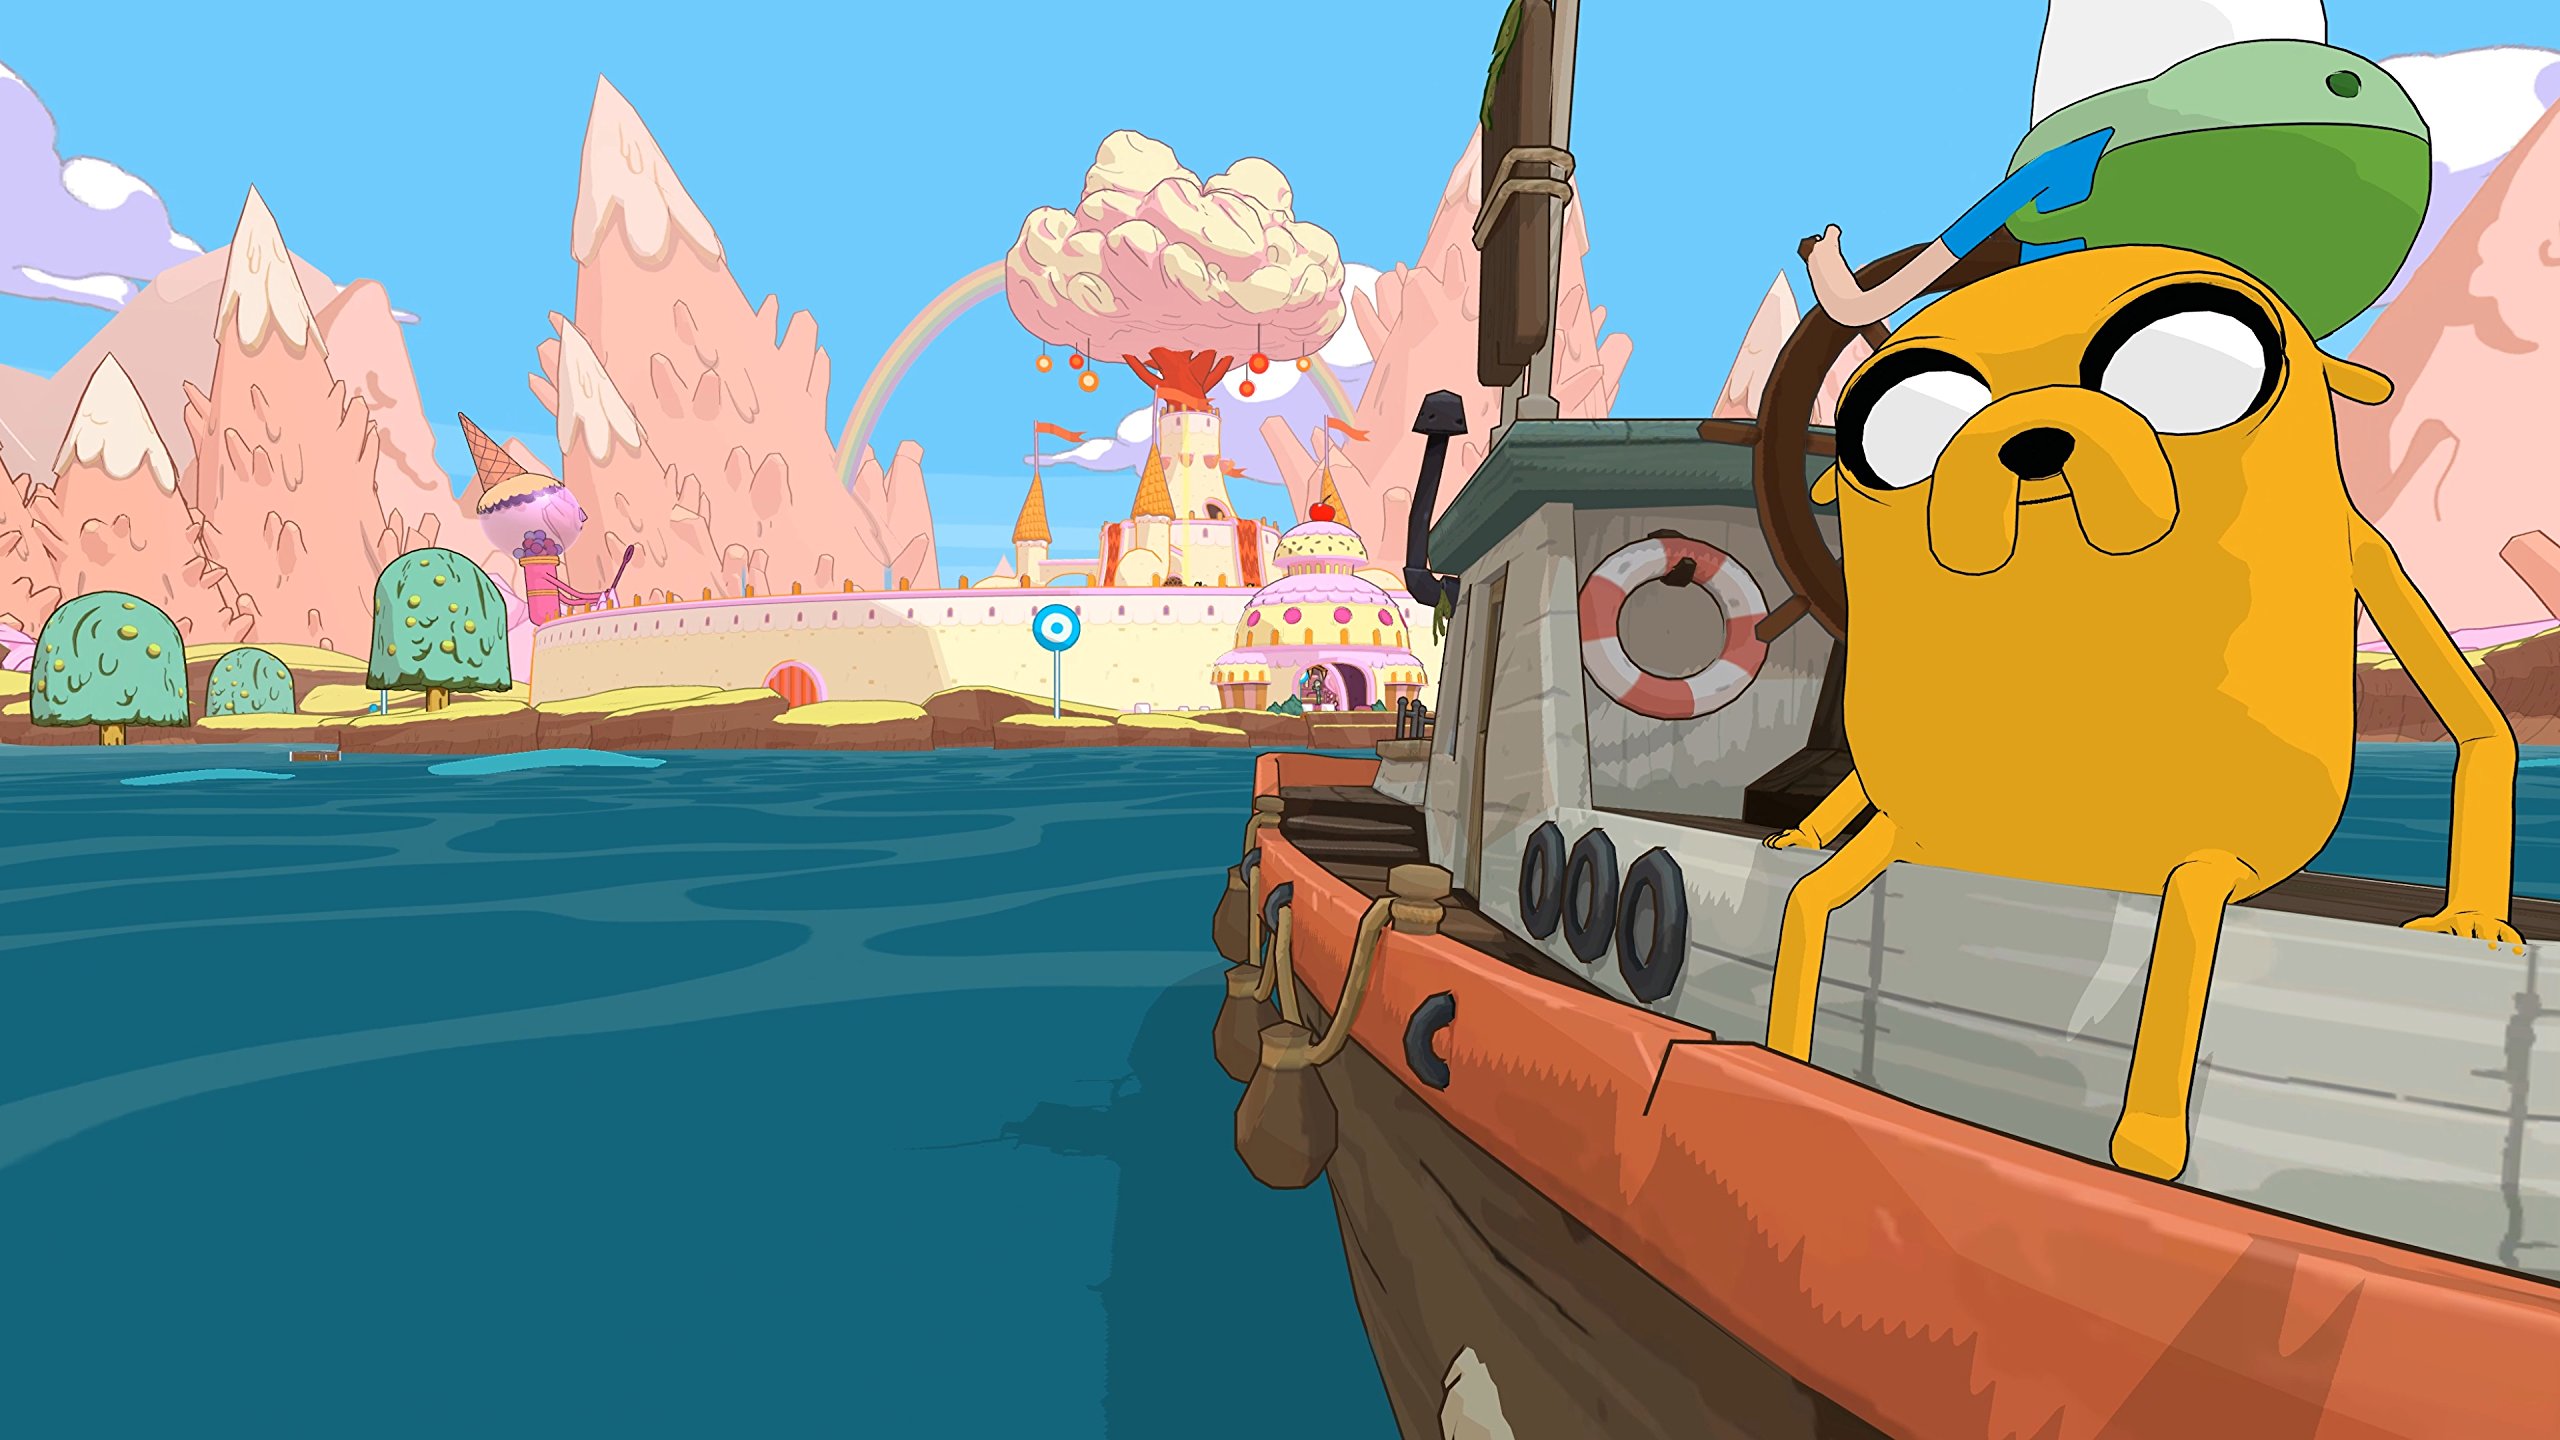 Adventure Time: Pirates of the Enchiridion - PlayStation 4 Edition